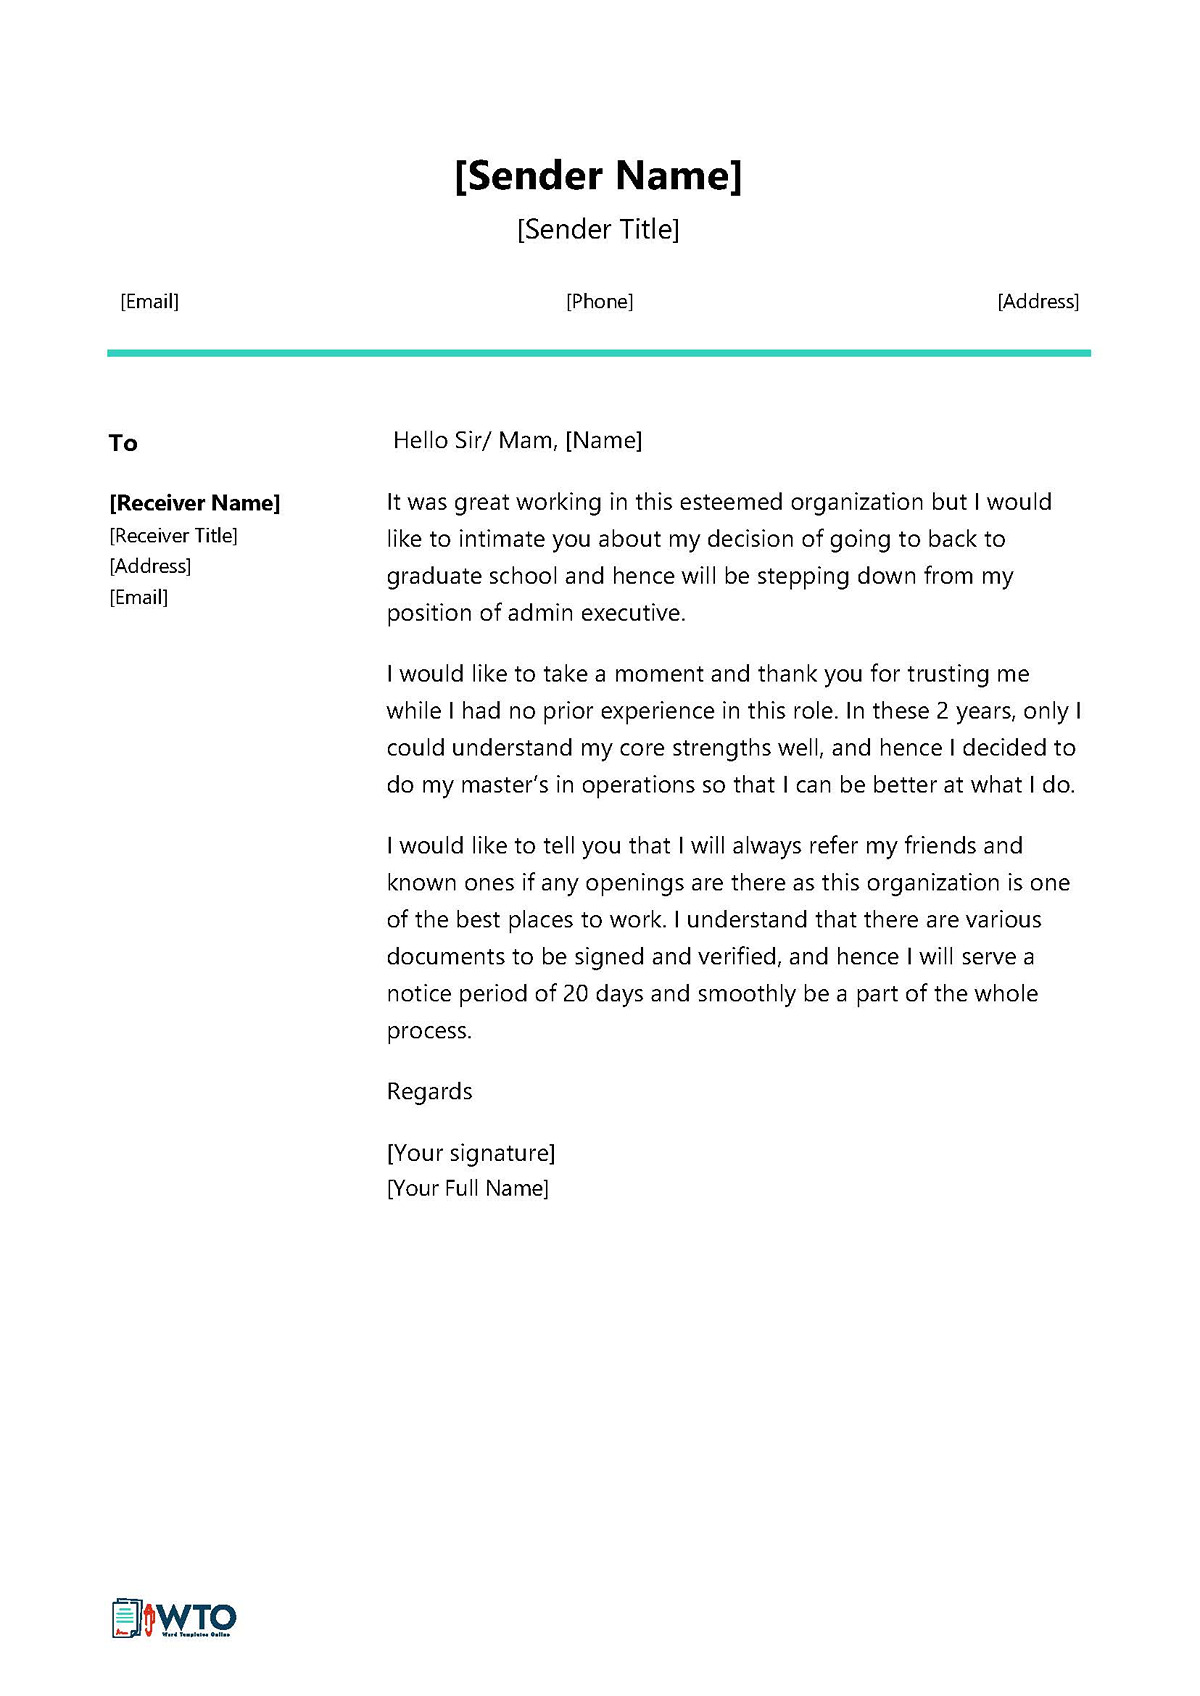 Resignation Letter for Going Back - Polite and Respectful Example